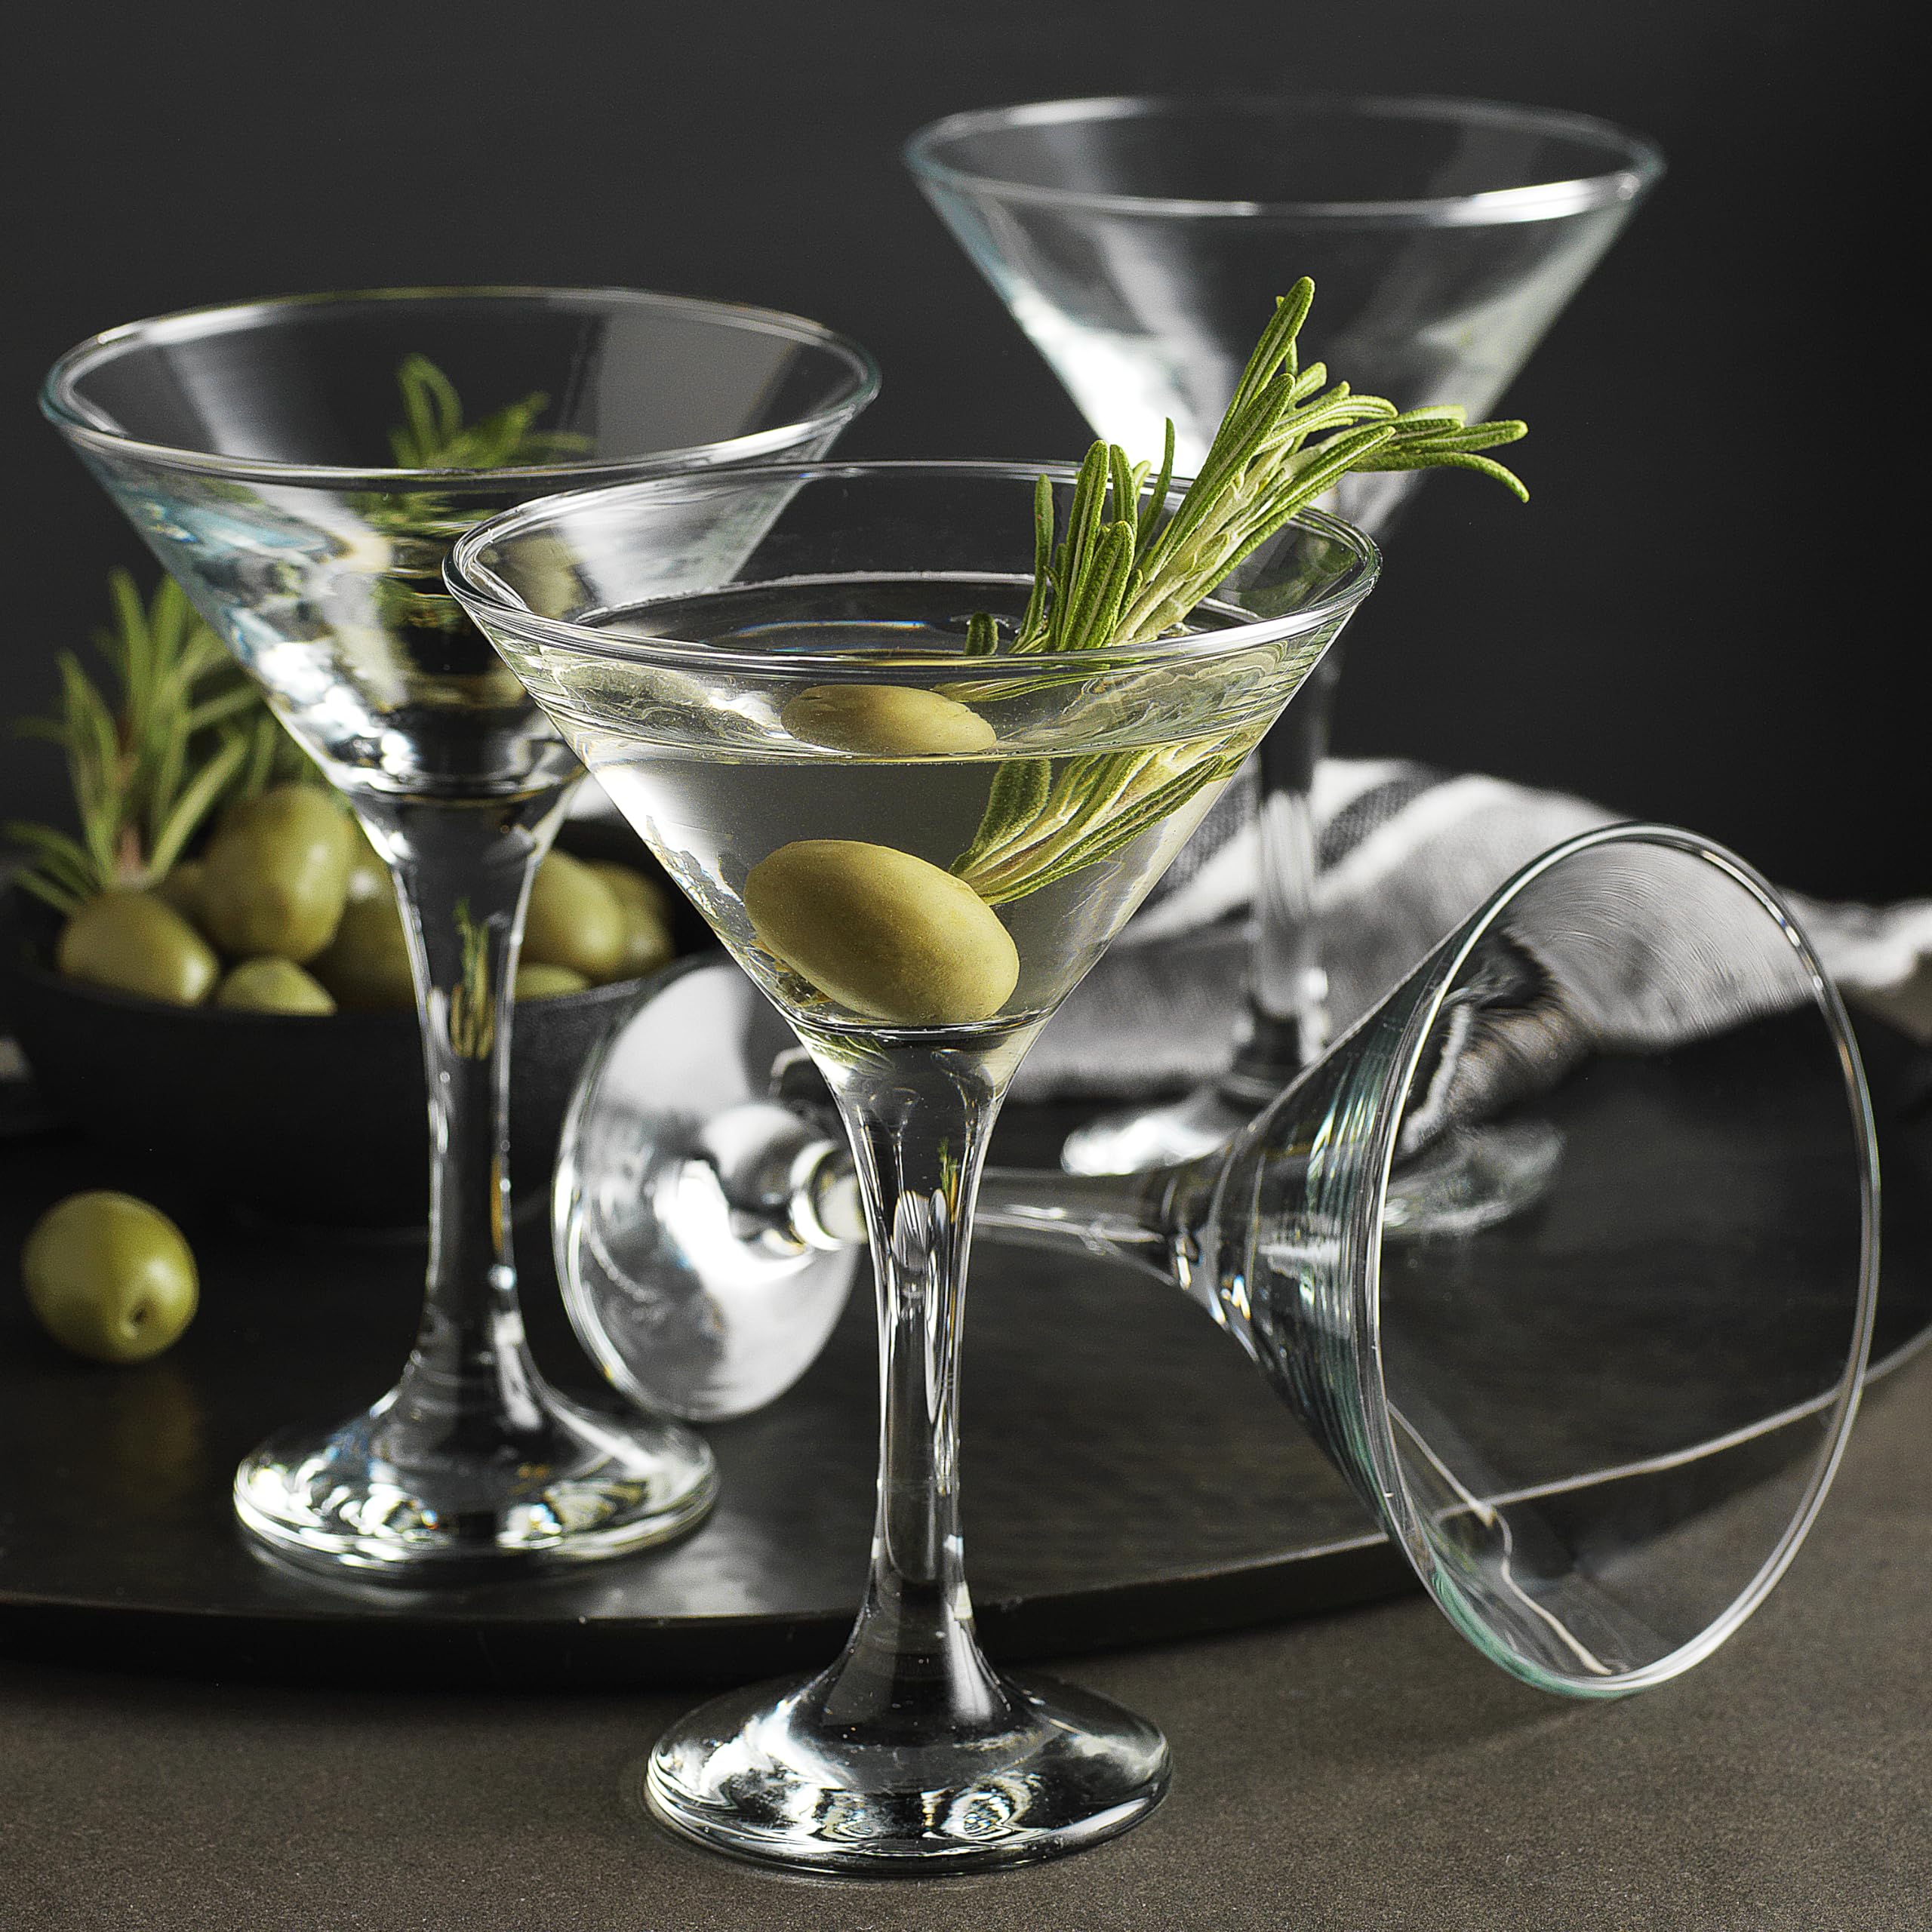 Glaver's Martini Glasses Set of 4 Cocktail Glasses, 6 Ounce Premium Strong Lead-Free Glass, Stemmed Margarita Glasses, For Bar, Martini, And More Dishwasher Safe  - Like New